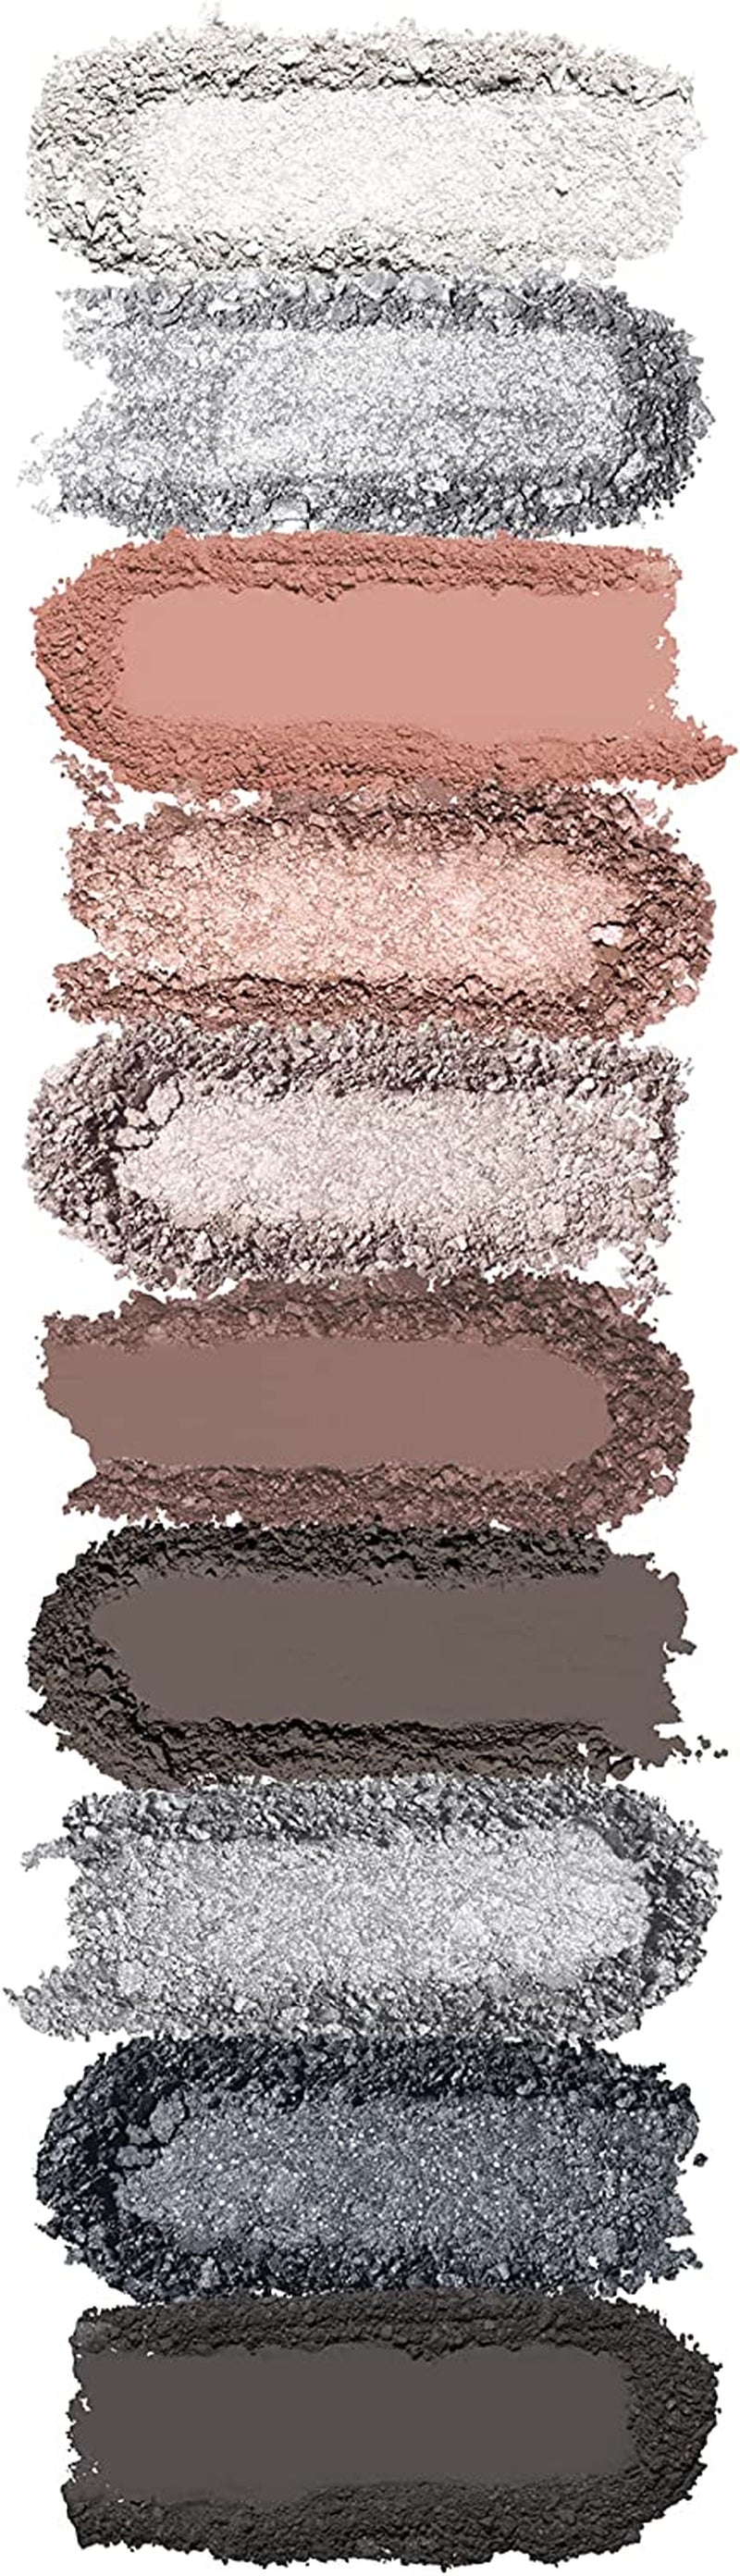 KIKO Milano Soft Nude Eyeshadow Palette 03 | Palette with 10 Multi-Finish Eyeshadows: Pearly, Matte and Metallic, 1.0 Count